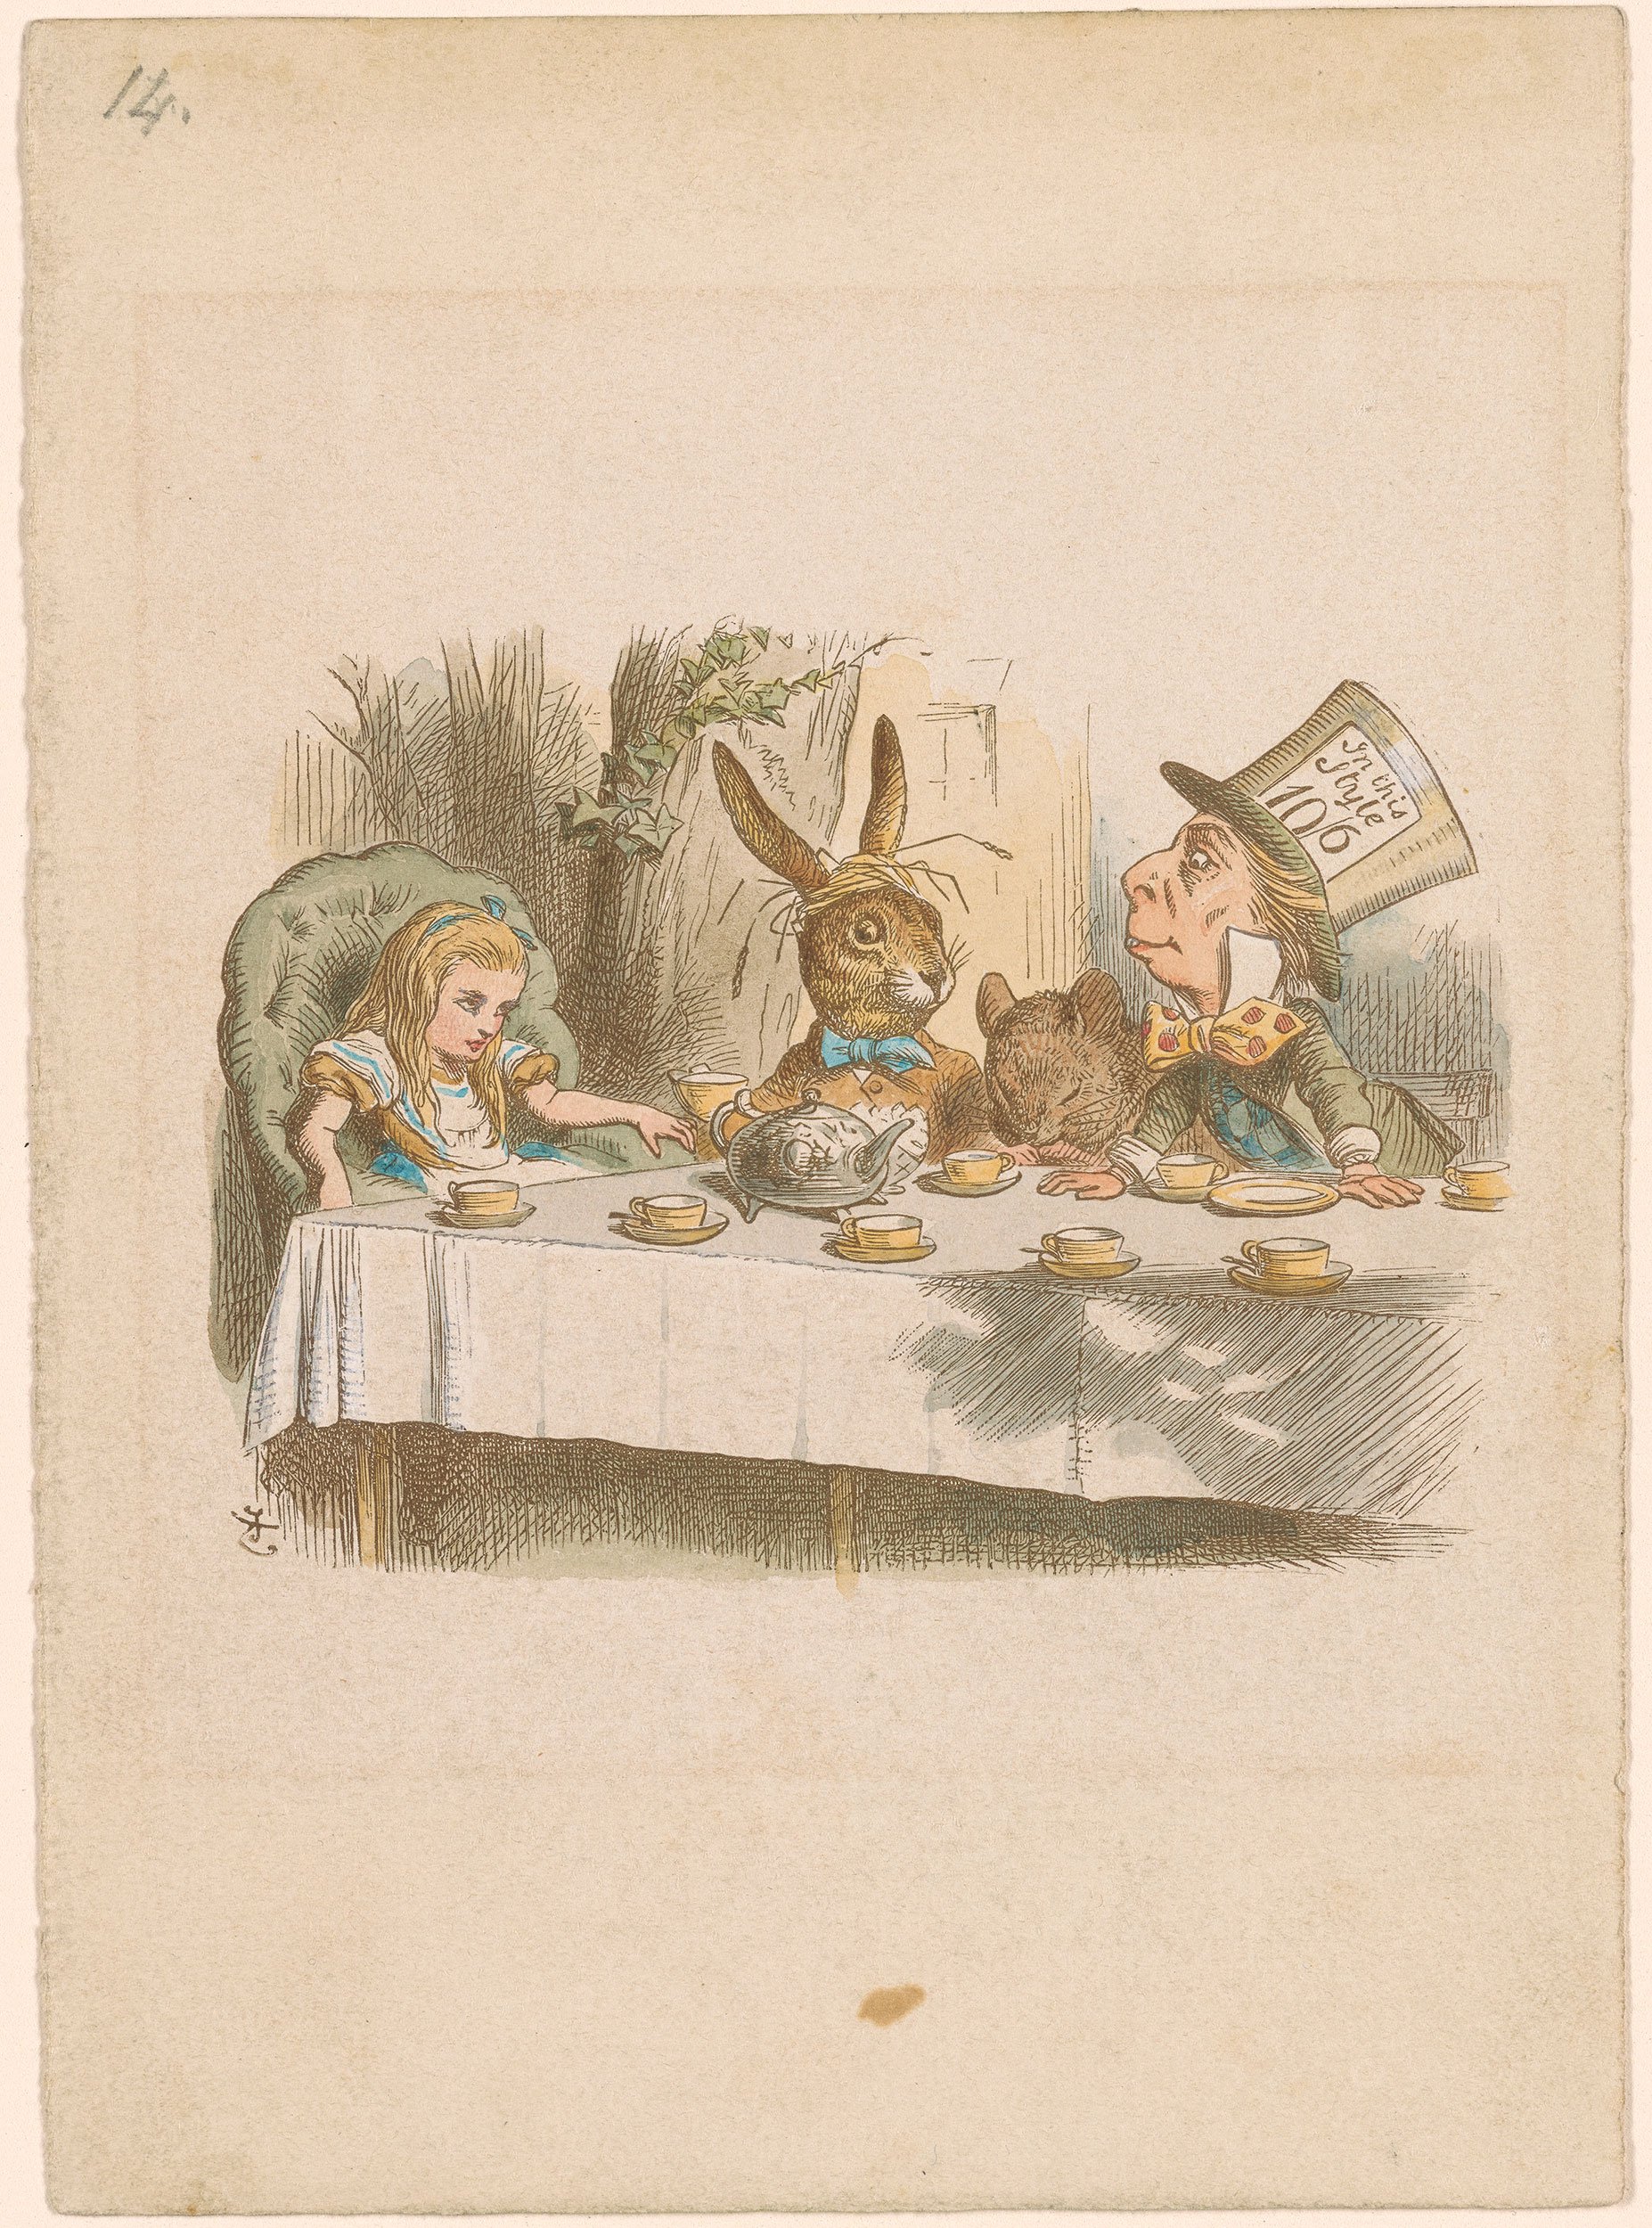 An illustration of the Mad Hatter hosting a tea party with Alice at the head of the table and various animal guests seated next to her.